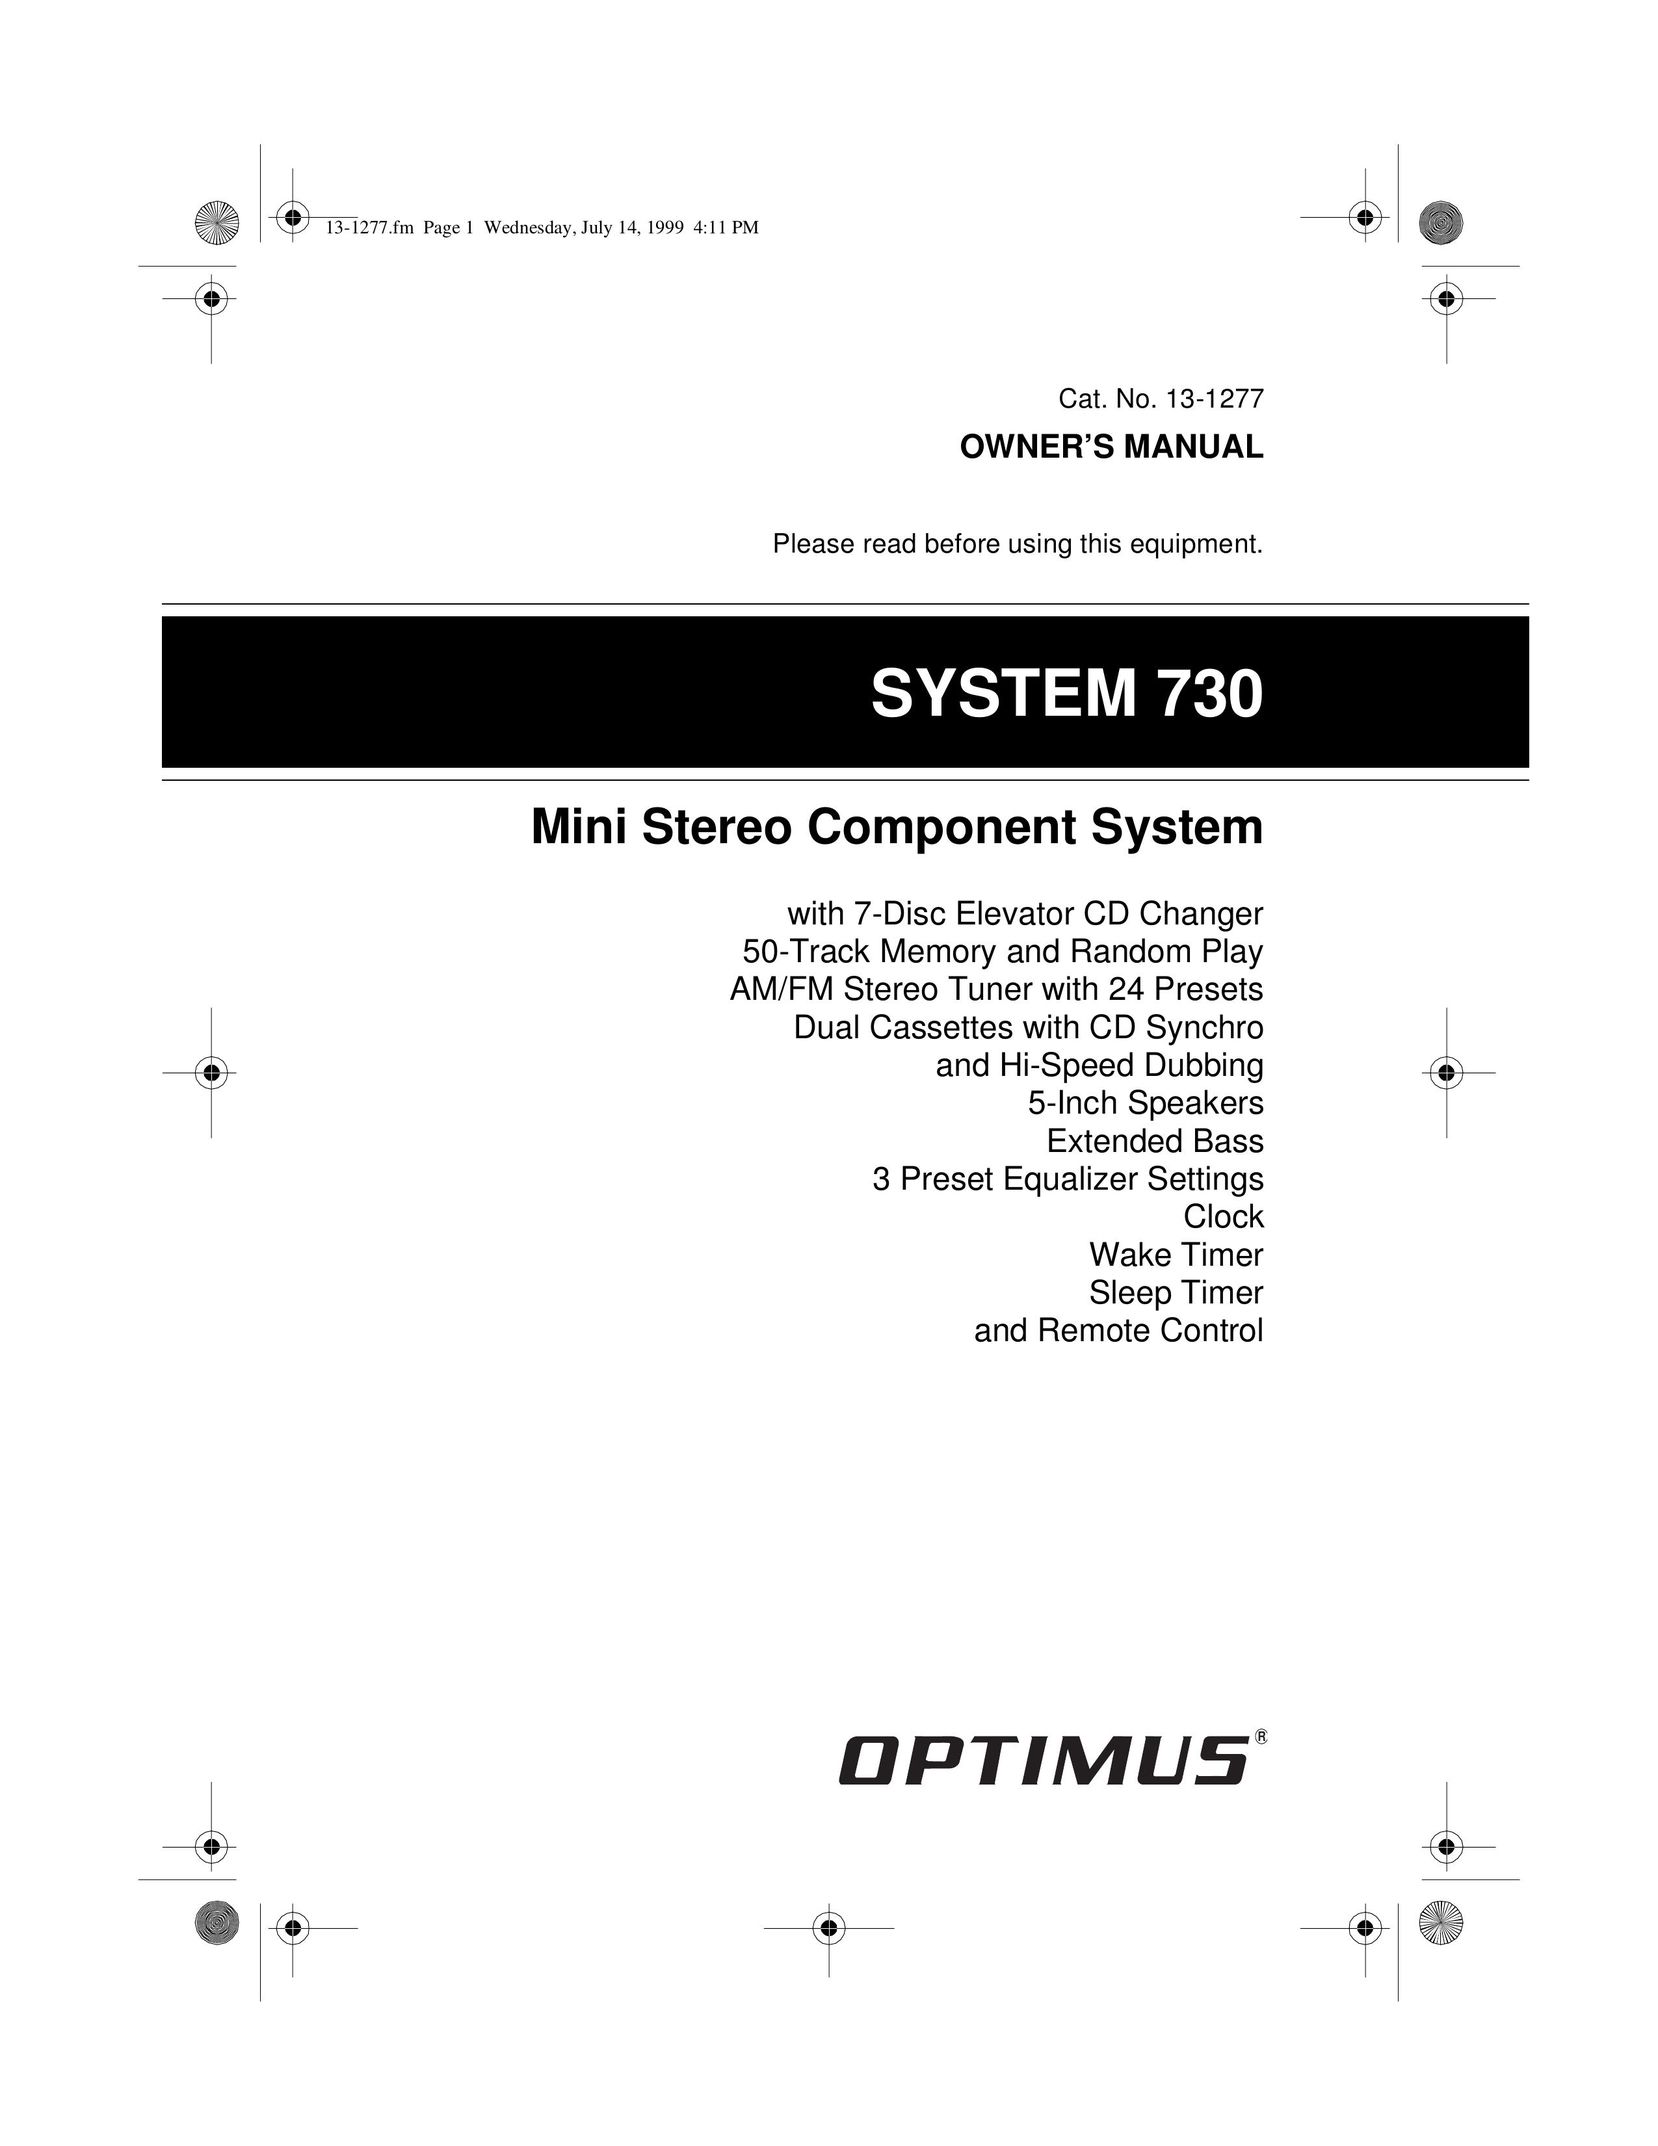 Optimus SYSTEM 730 Home Theater System User Manual